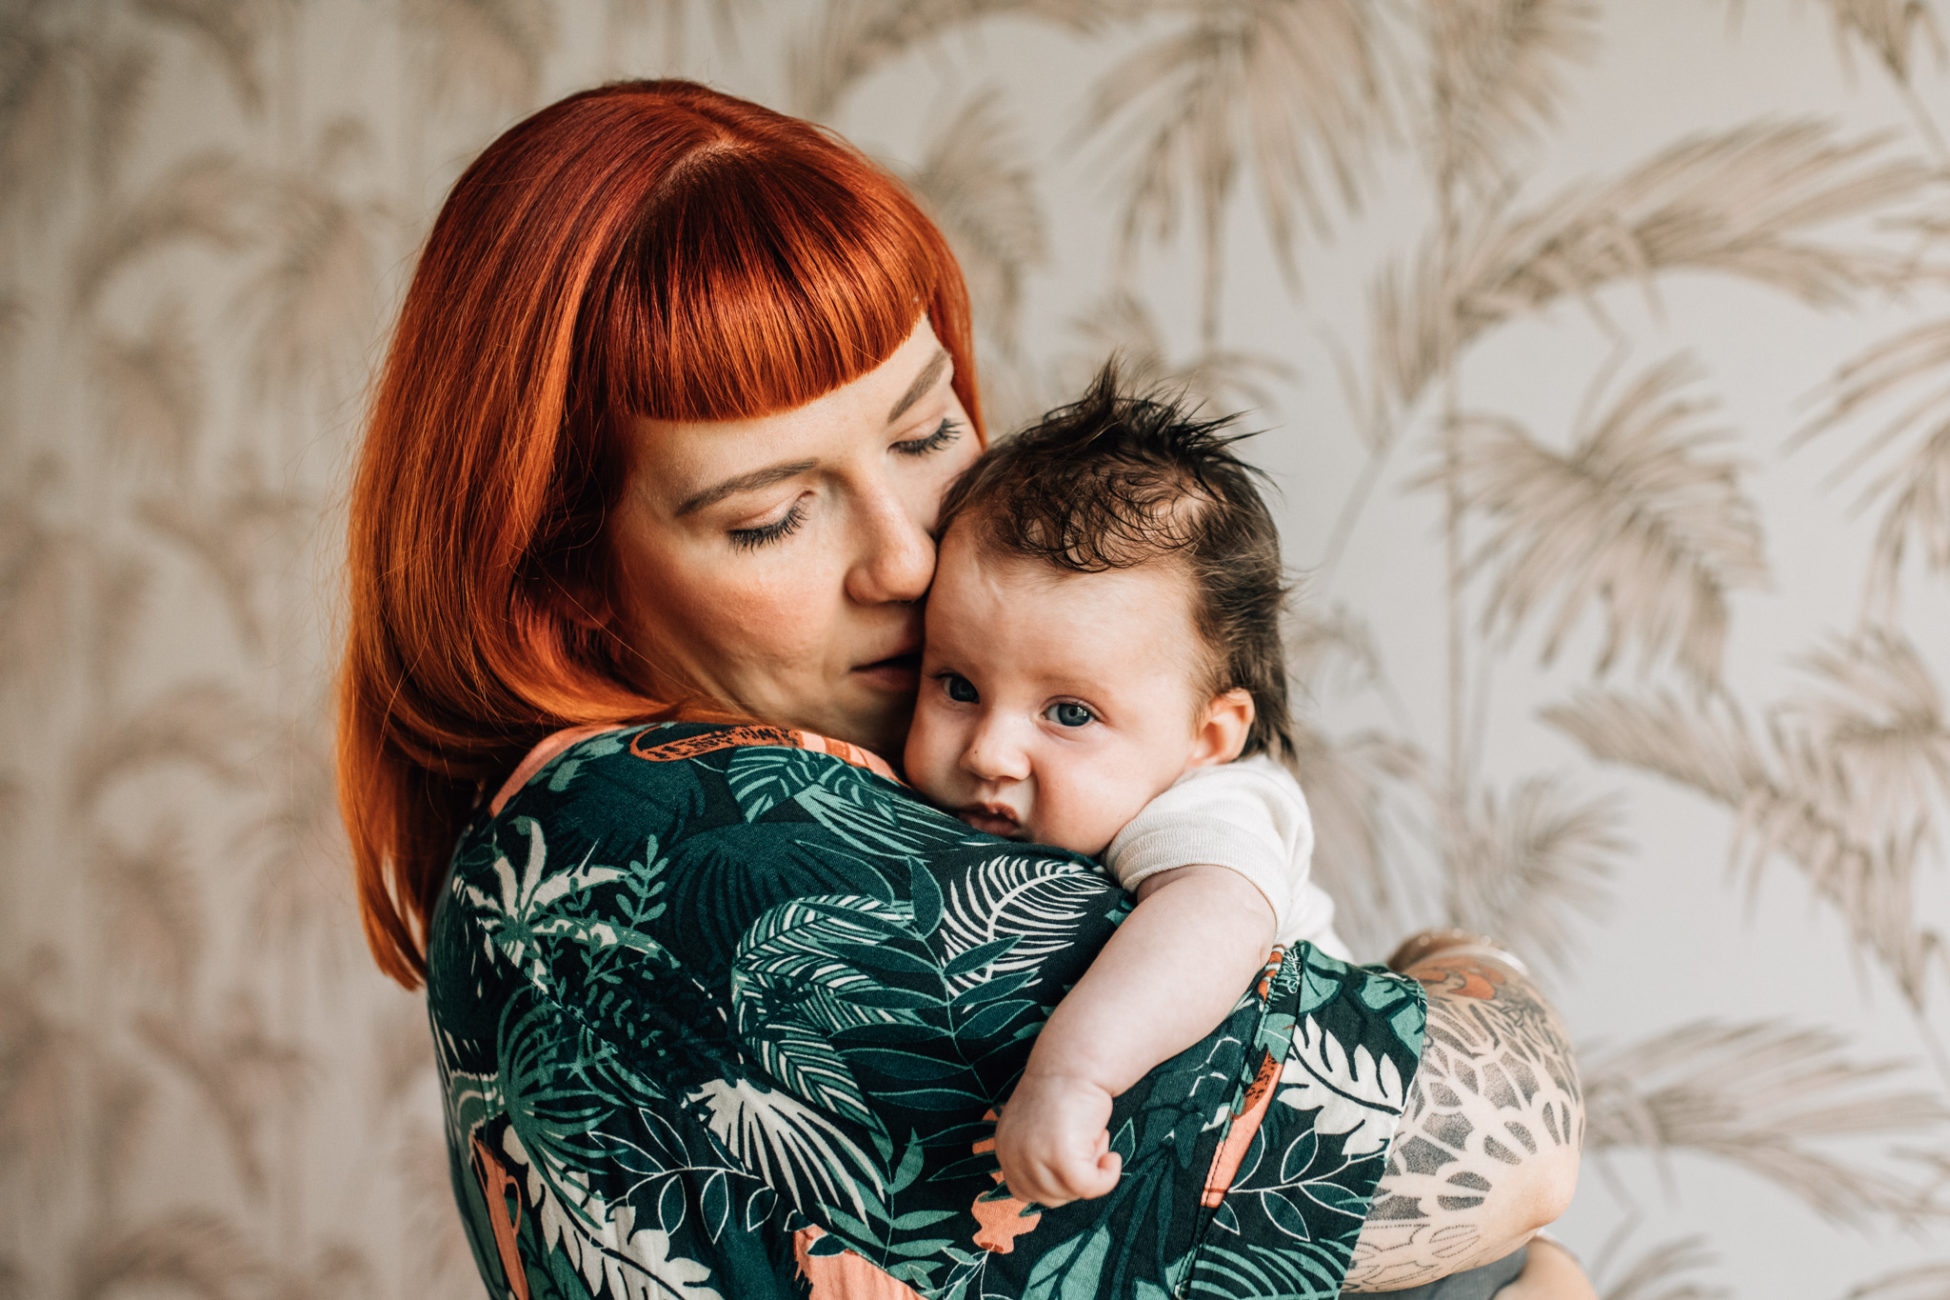 Portrait. Mom is holding her baby. She has red hair and is wearing a stunning dress.